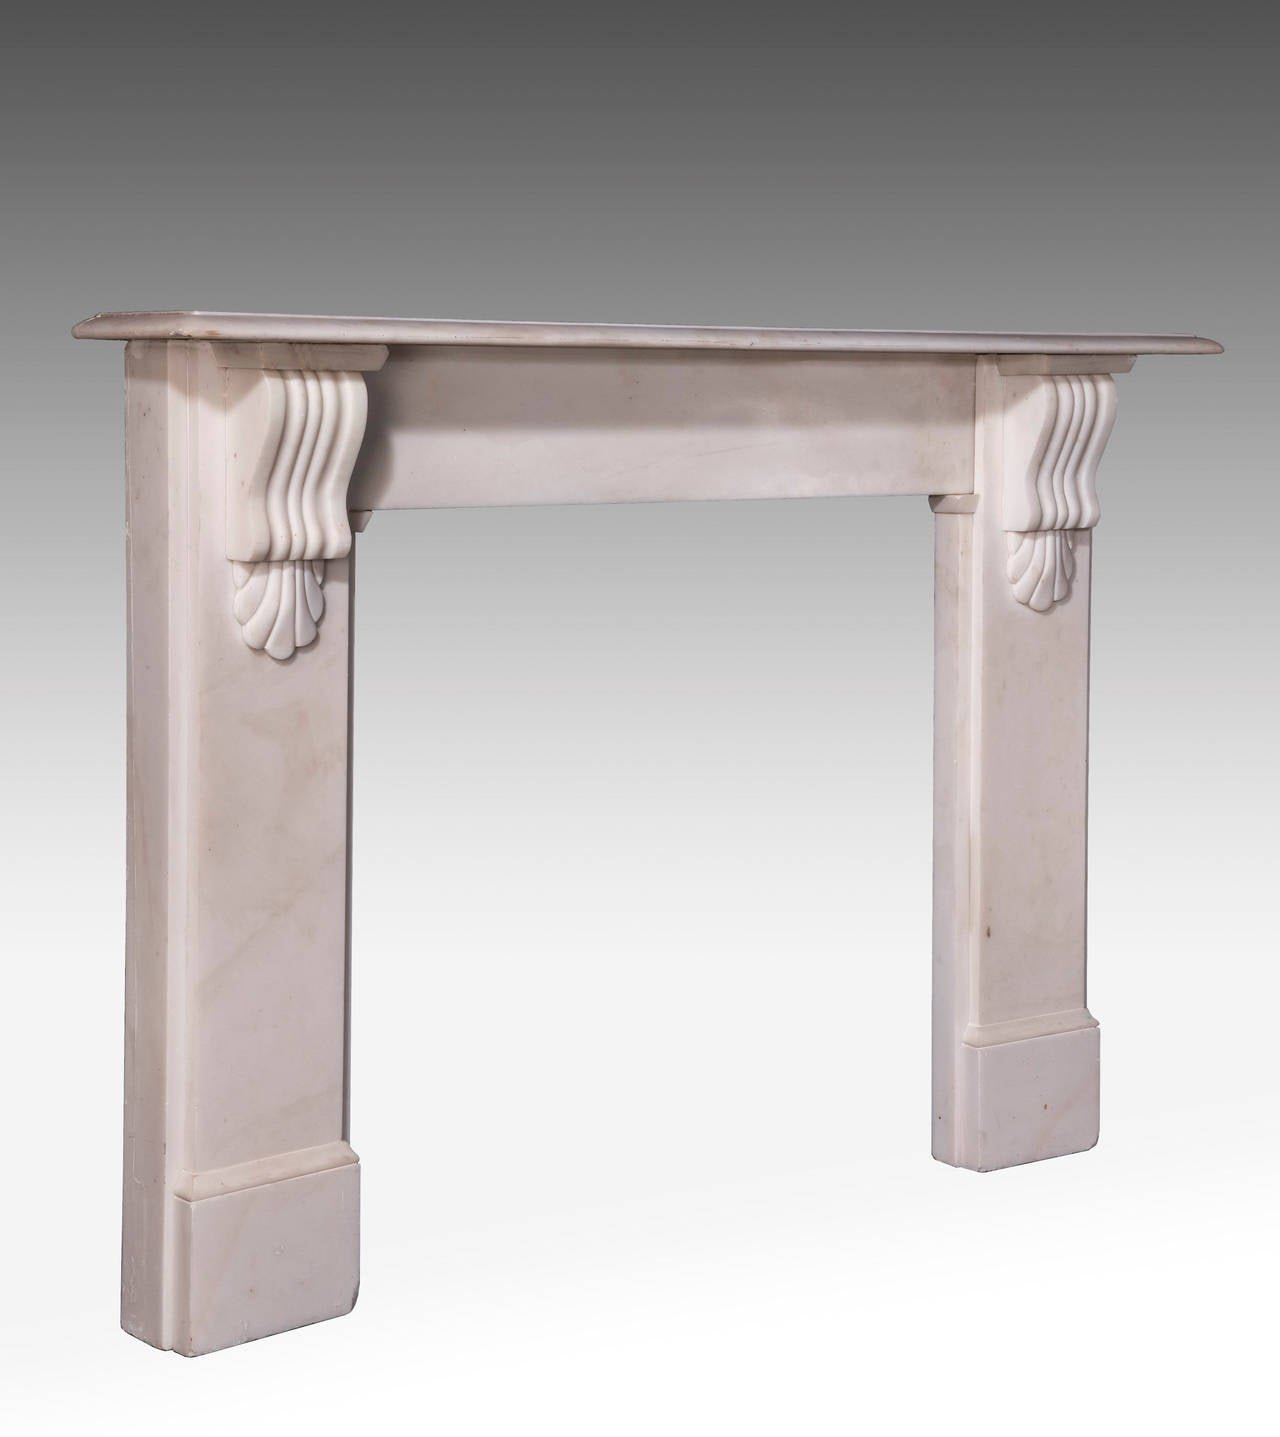 White marble fire place surround of very simple form. The shelves supported with carved boss’s. Ex Private house in Mayfair London W1.

Shelf length - 48.25 inches.
Shelf depth - 14.00 inches.
Opening height - 33.50 inches.
Opening width 33.75